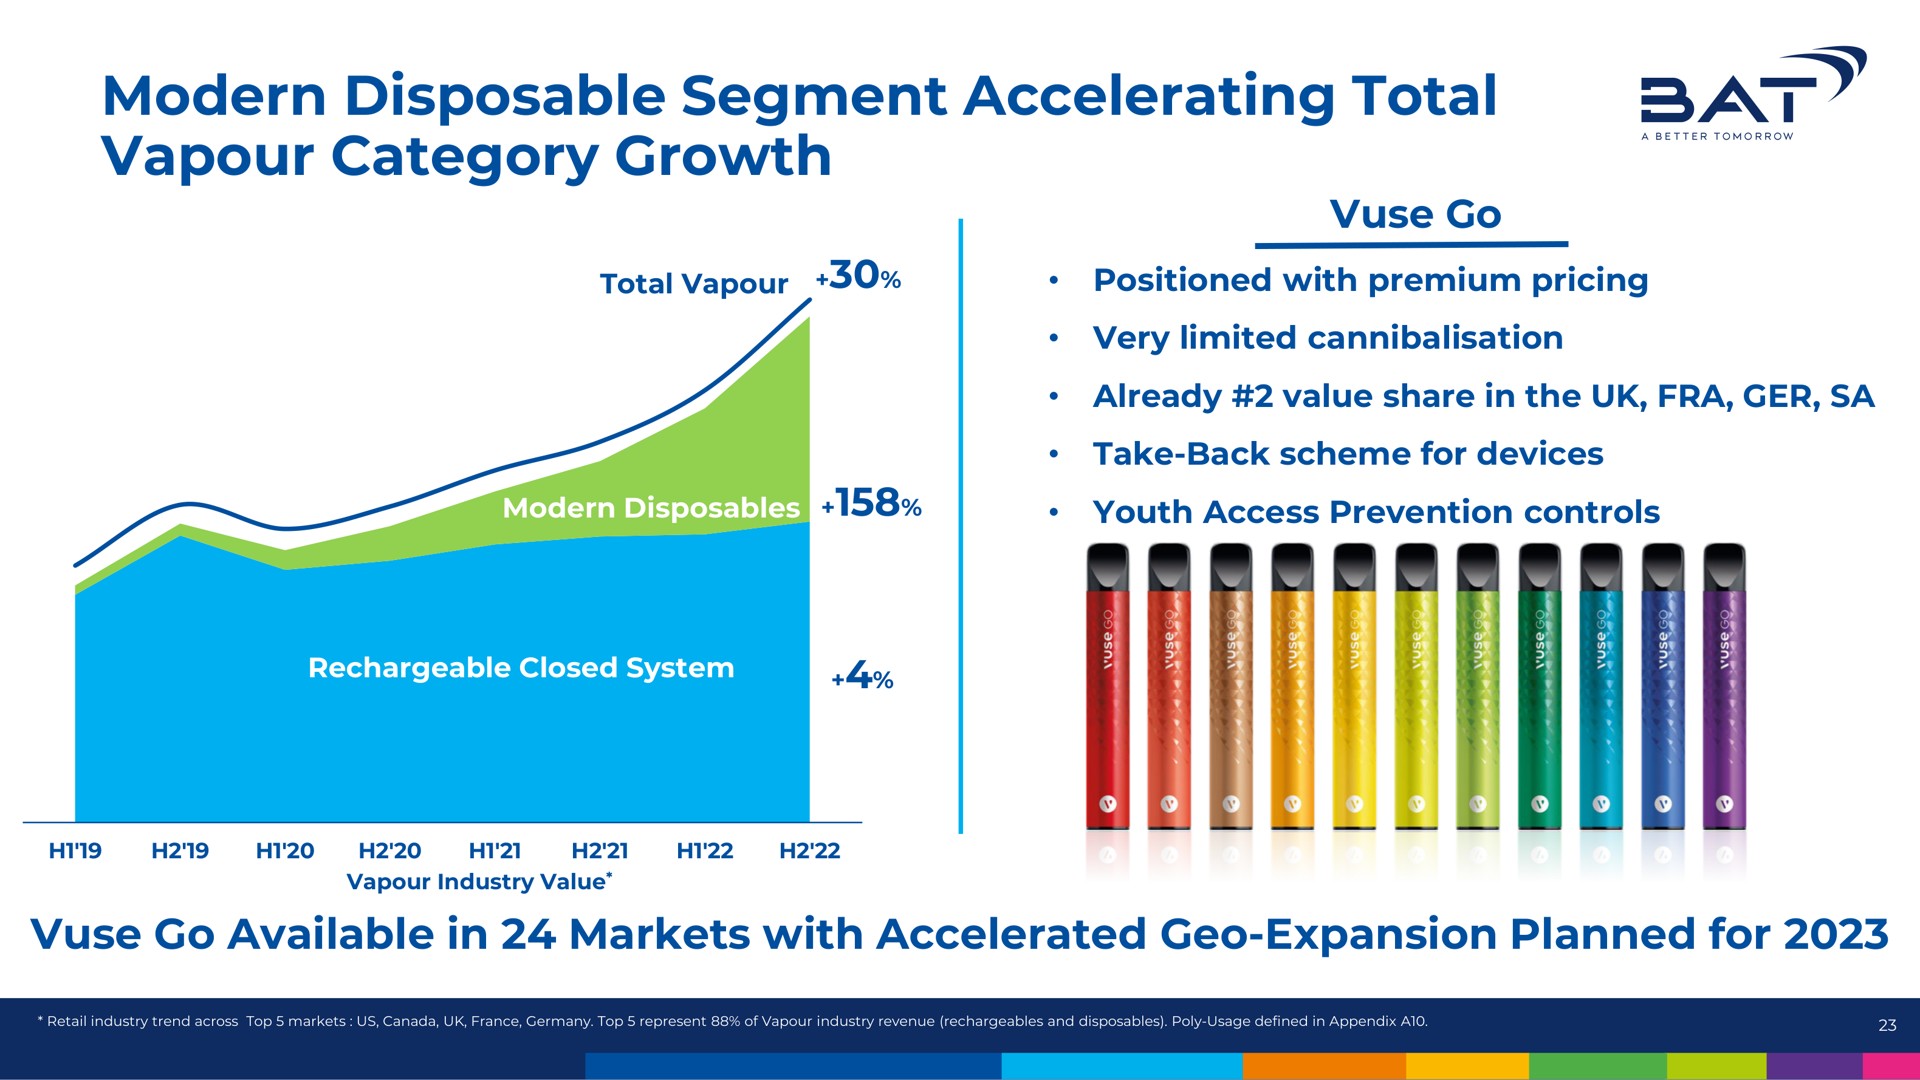 modern disposable segment accelerating total category growth at | BAT